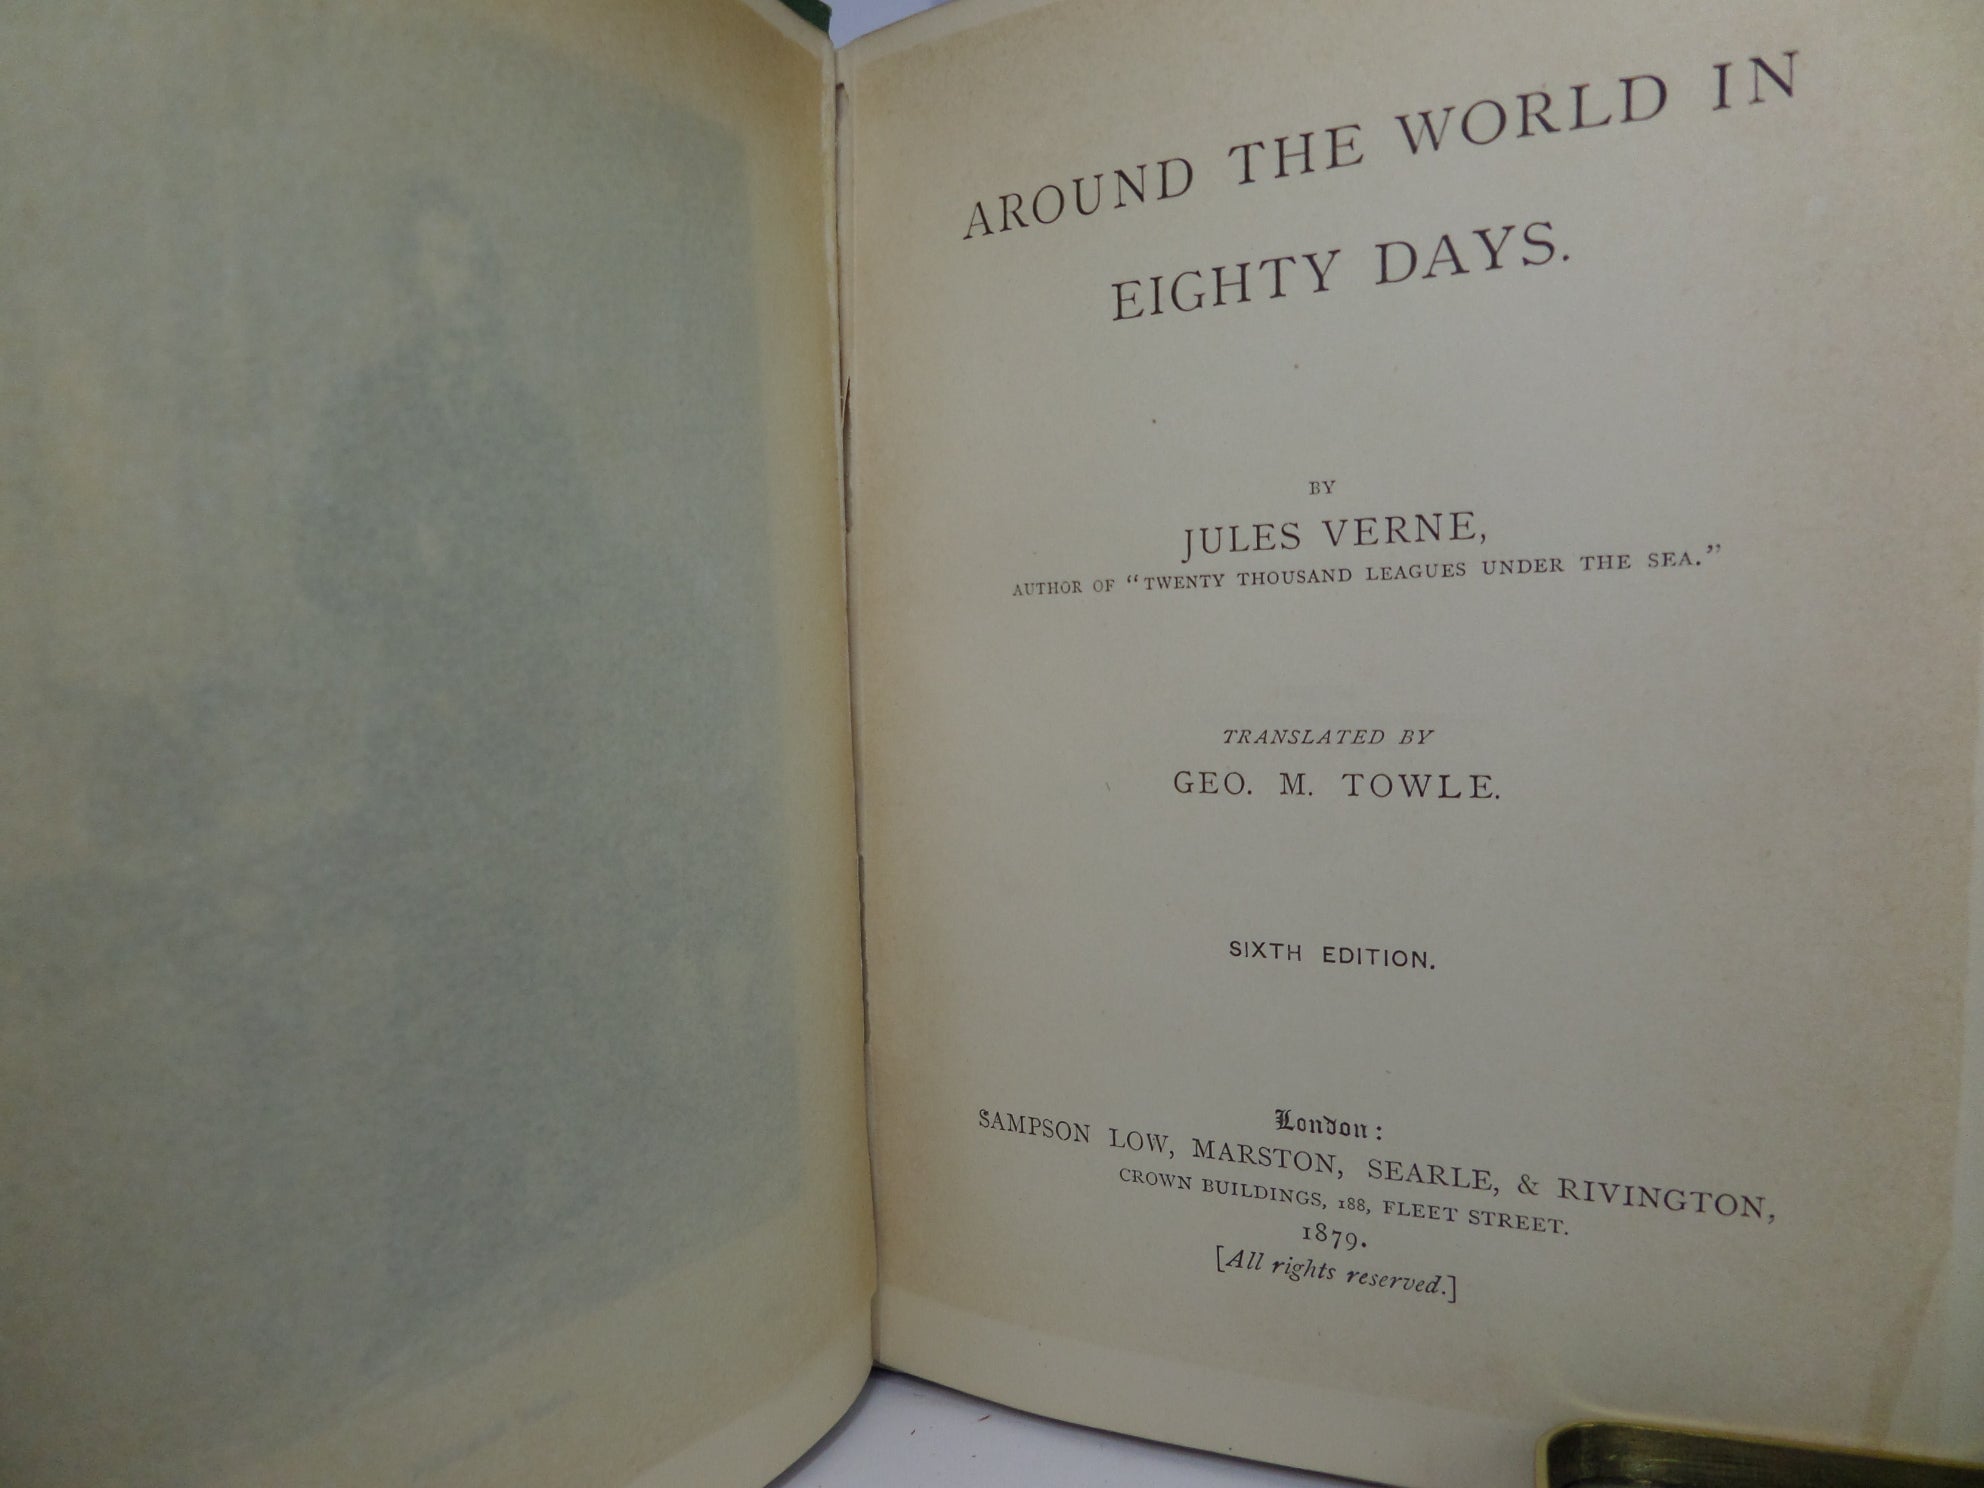 AROUND THE WORLD IN EIGHTY DAYS BY JULES VERNE 1879 SIXTH EDITION